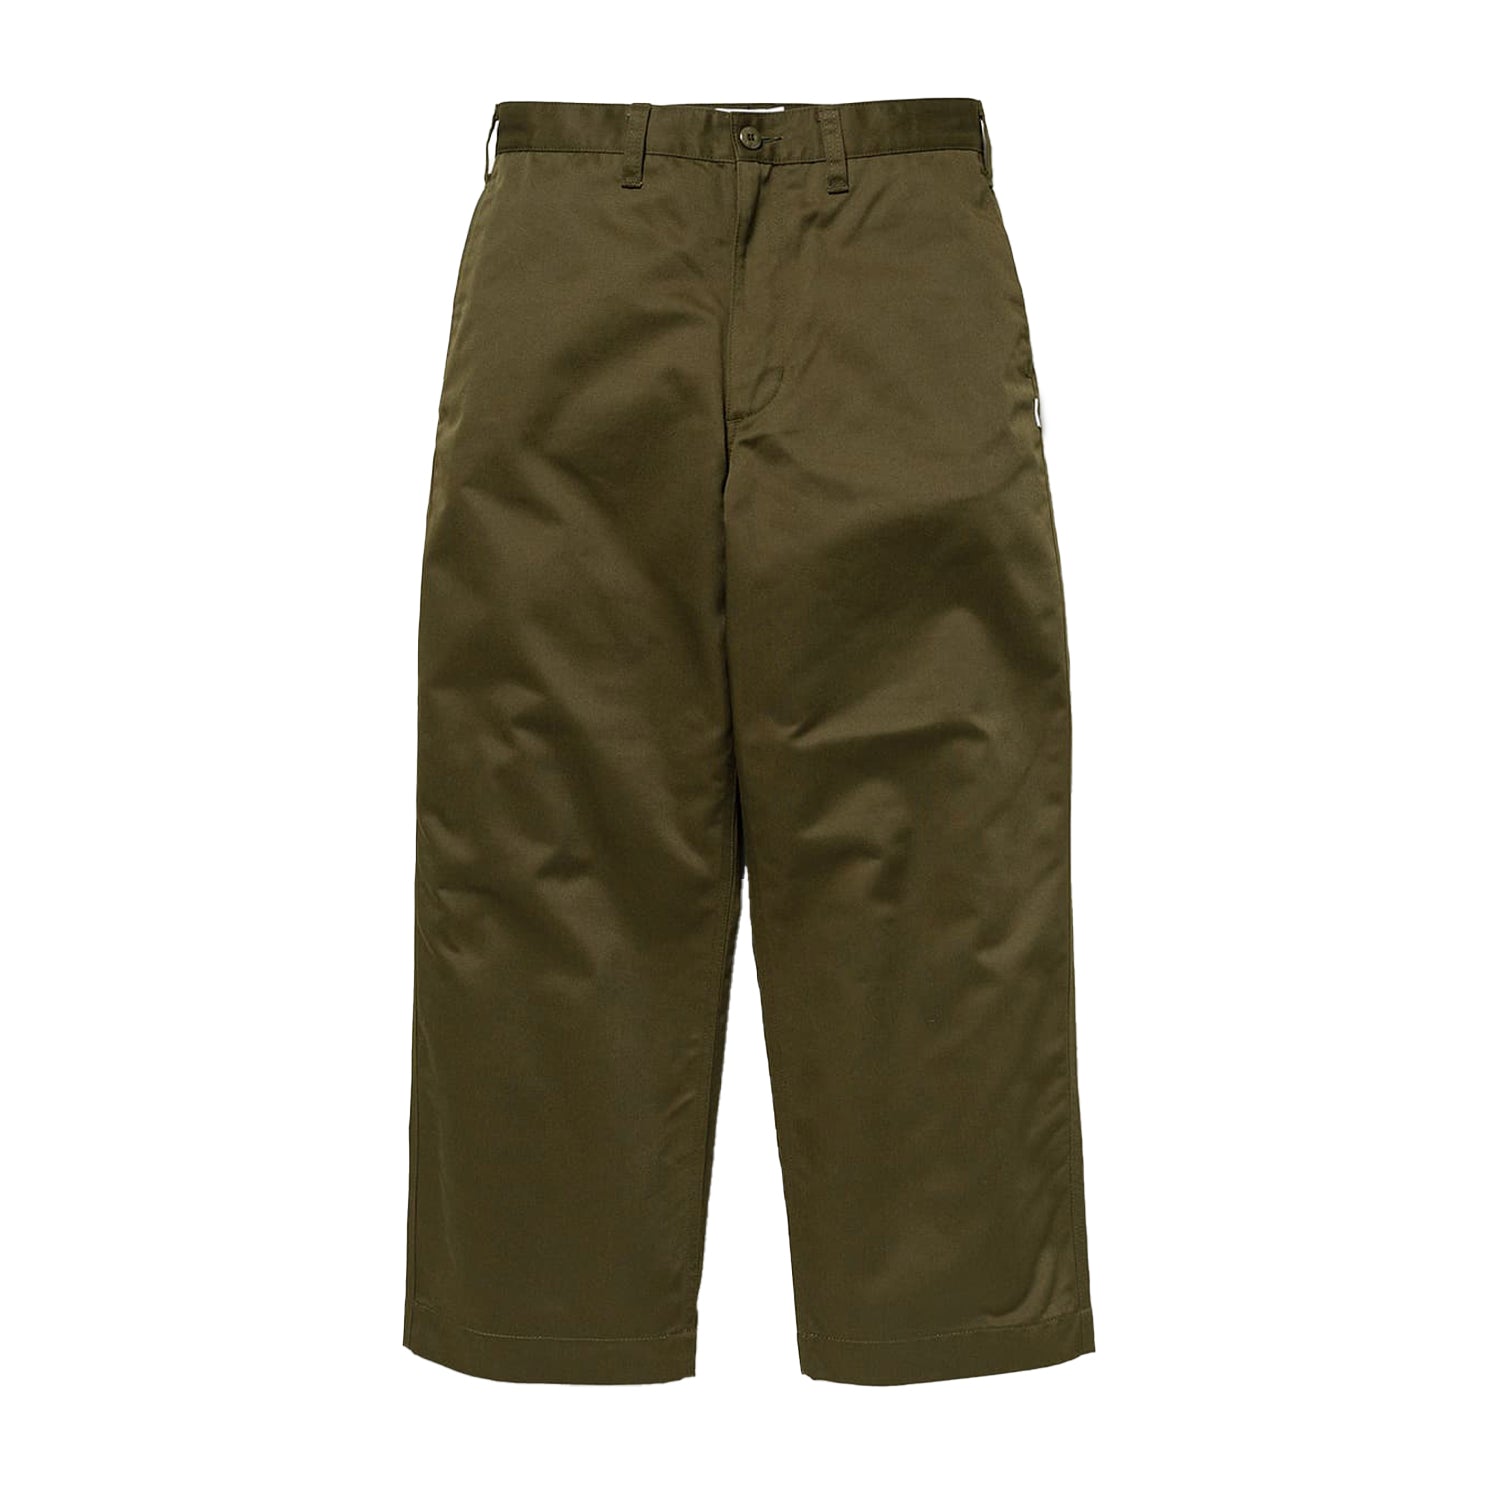 MILT9601 / Trousers / CTPL. Twill - INVINCIBLE